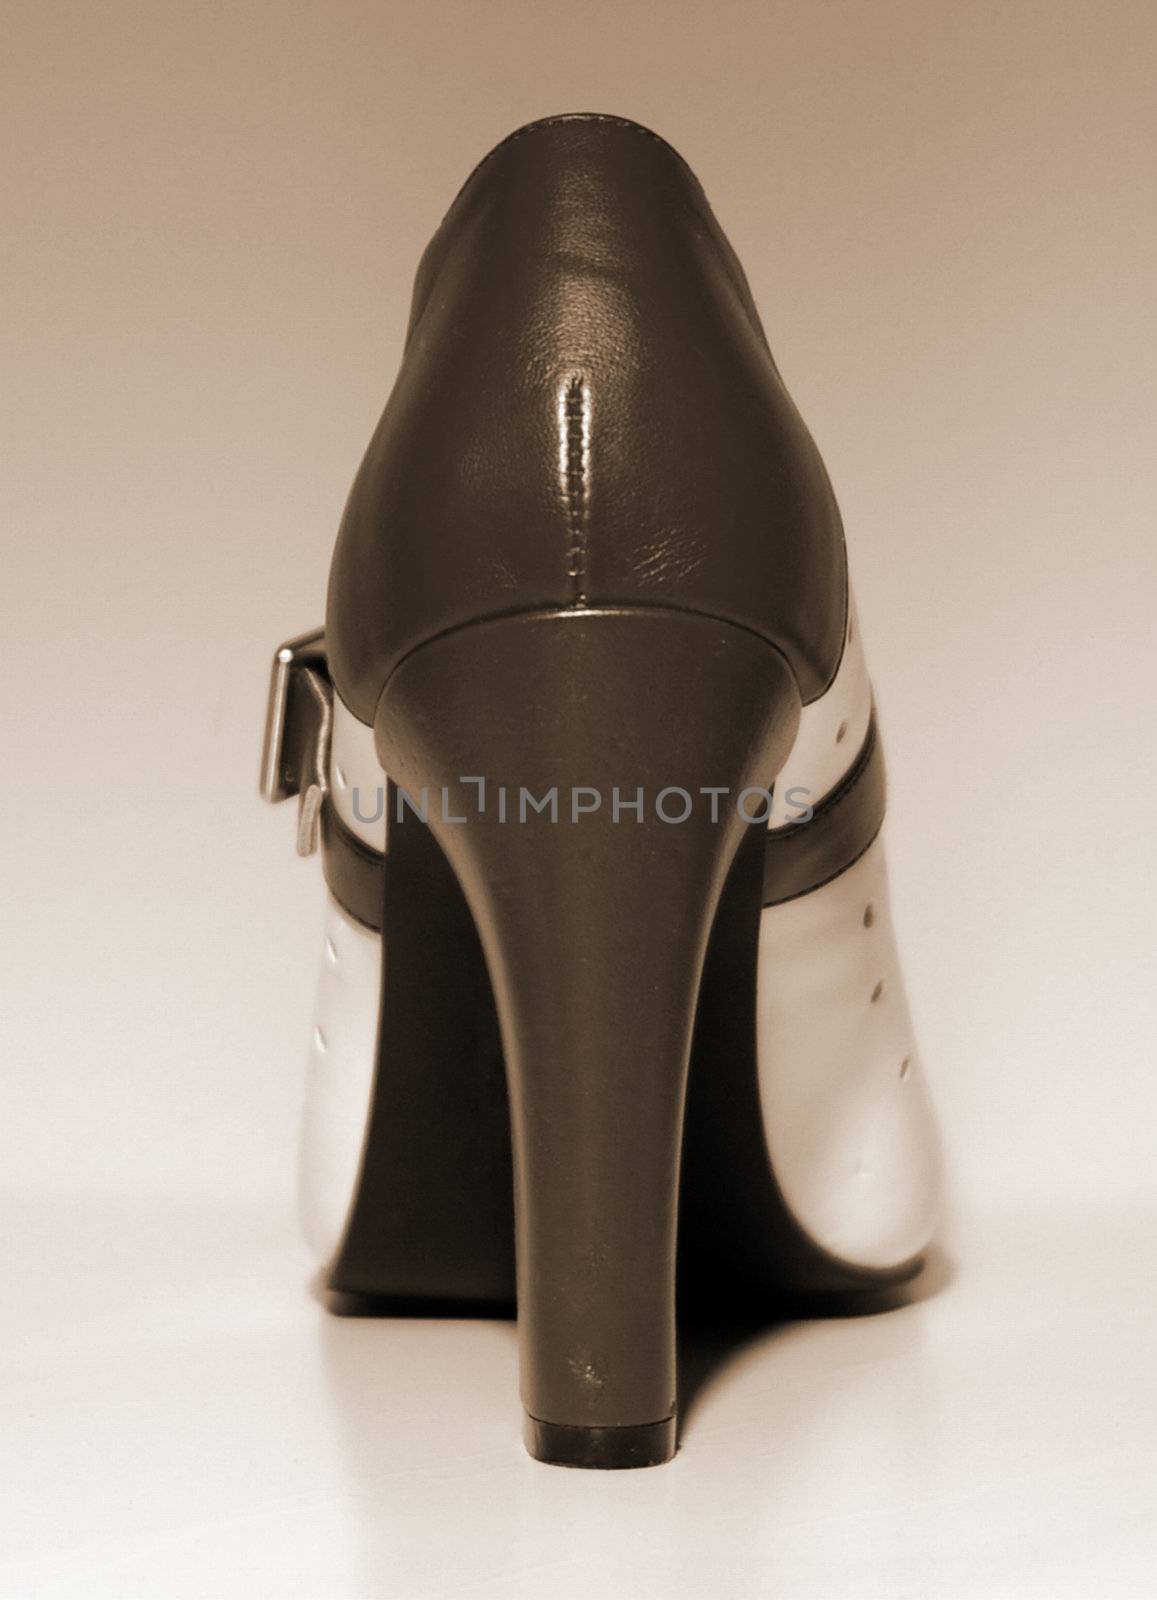 An end view of a ladies high heel